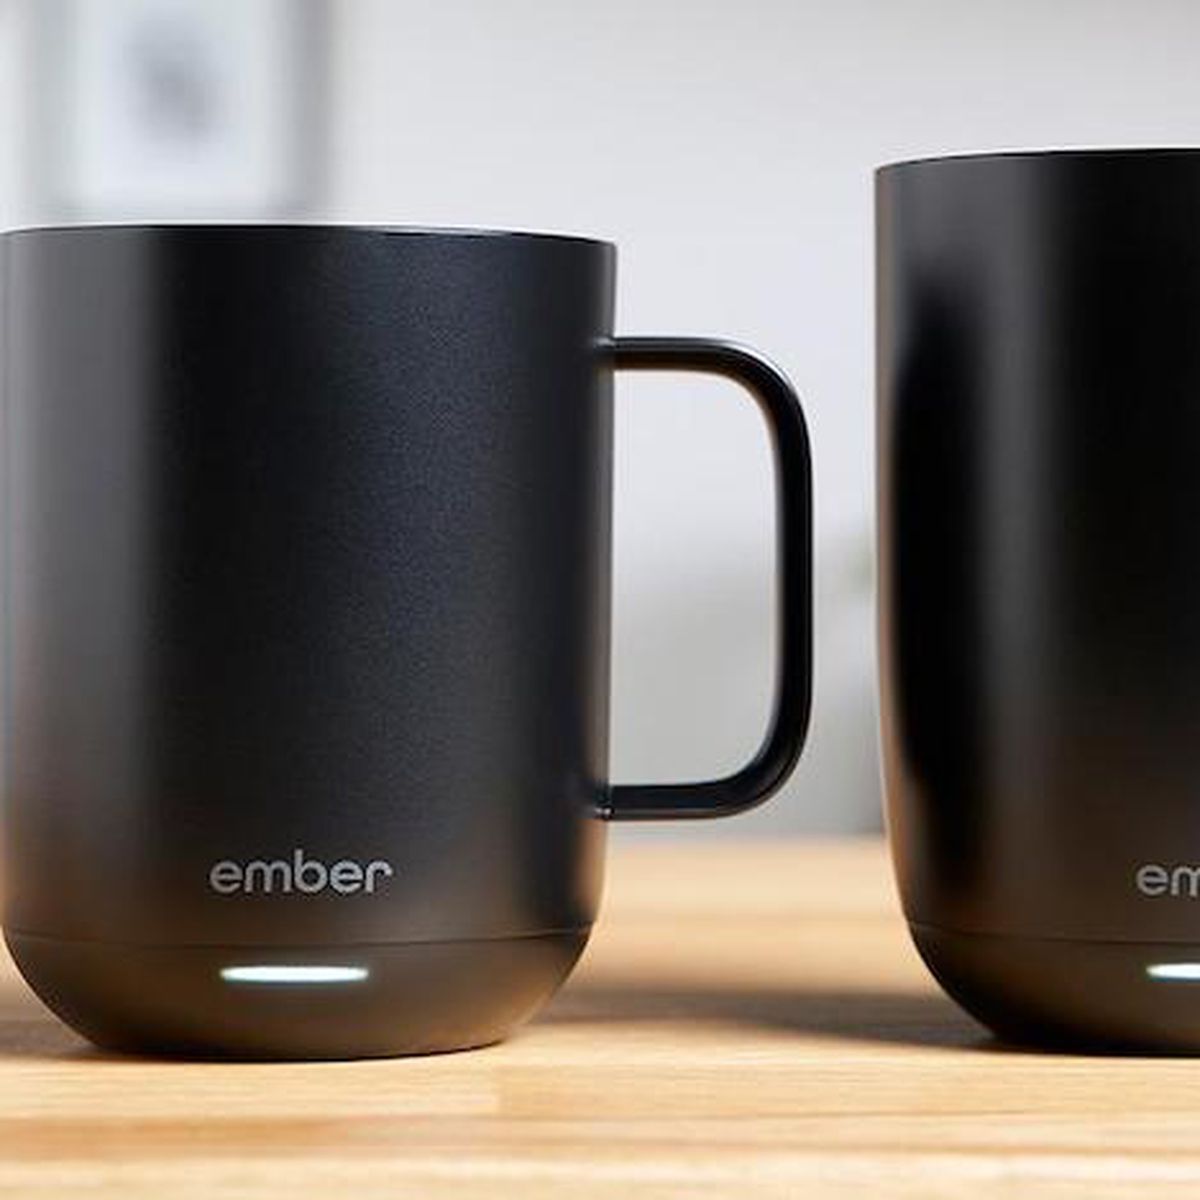 Ember Launches Larger Capacity 14oz Ceramic Mug, Available from